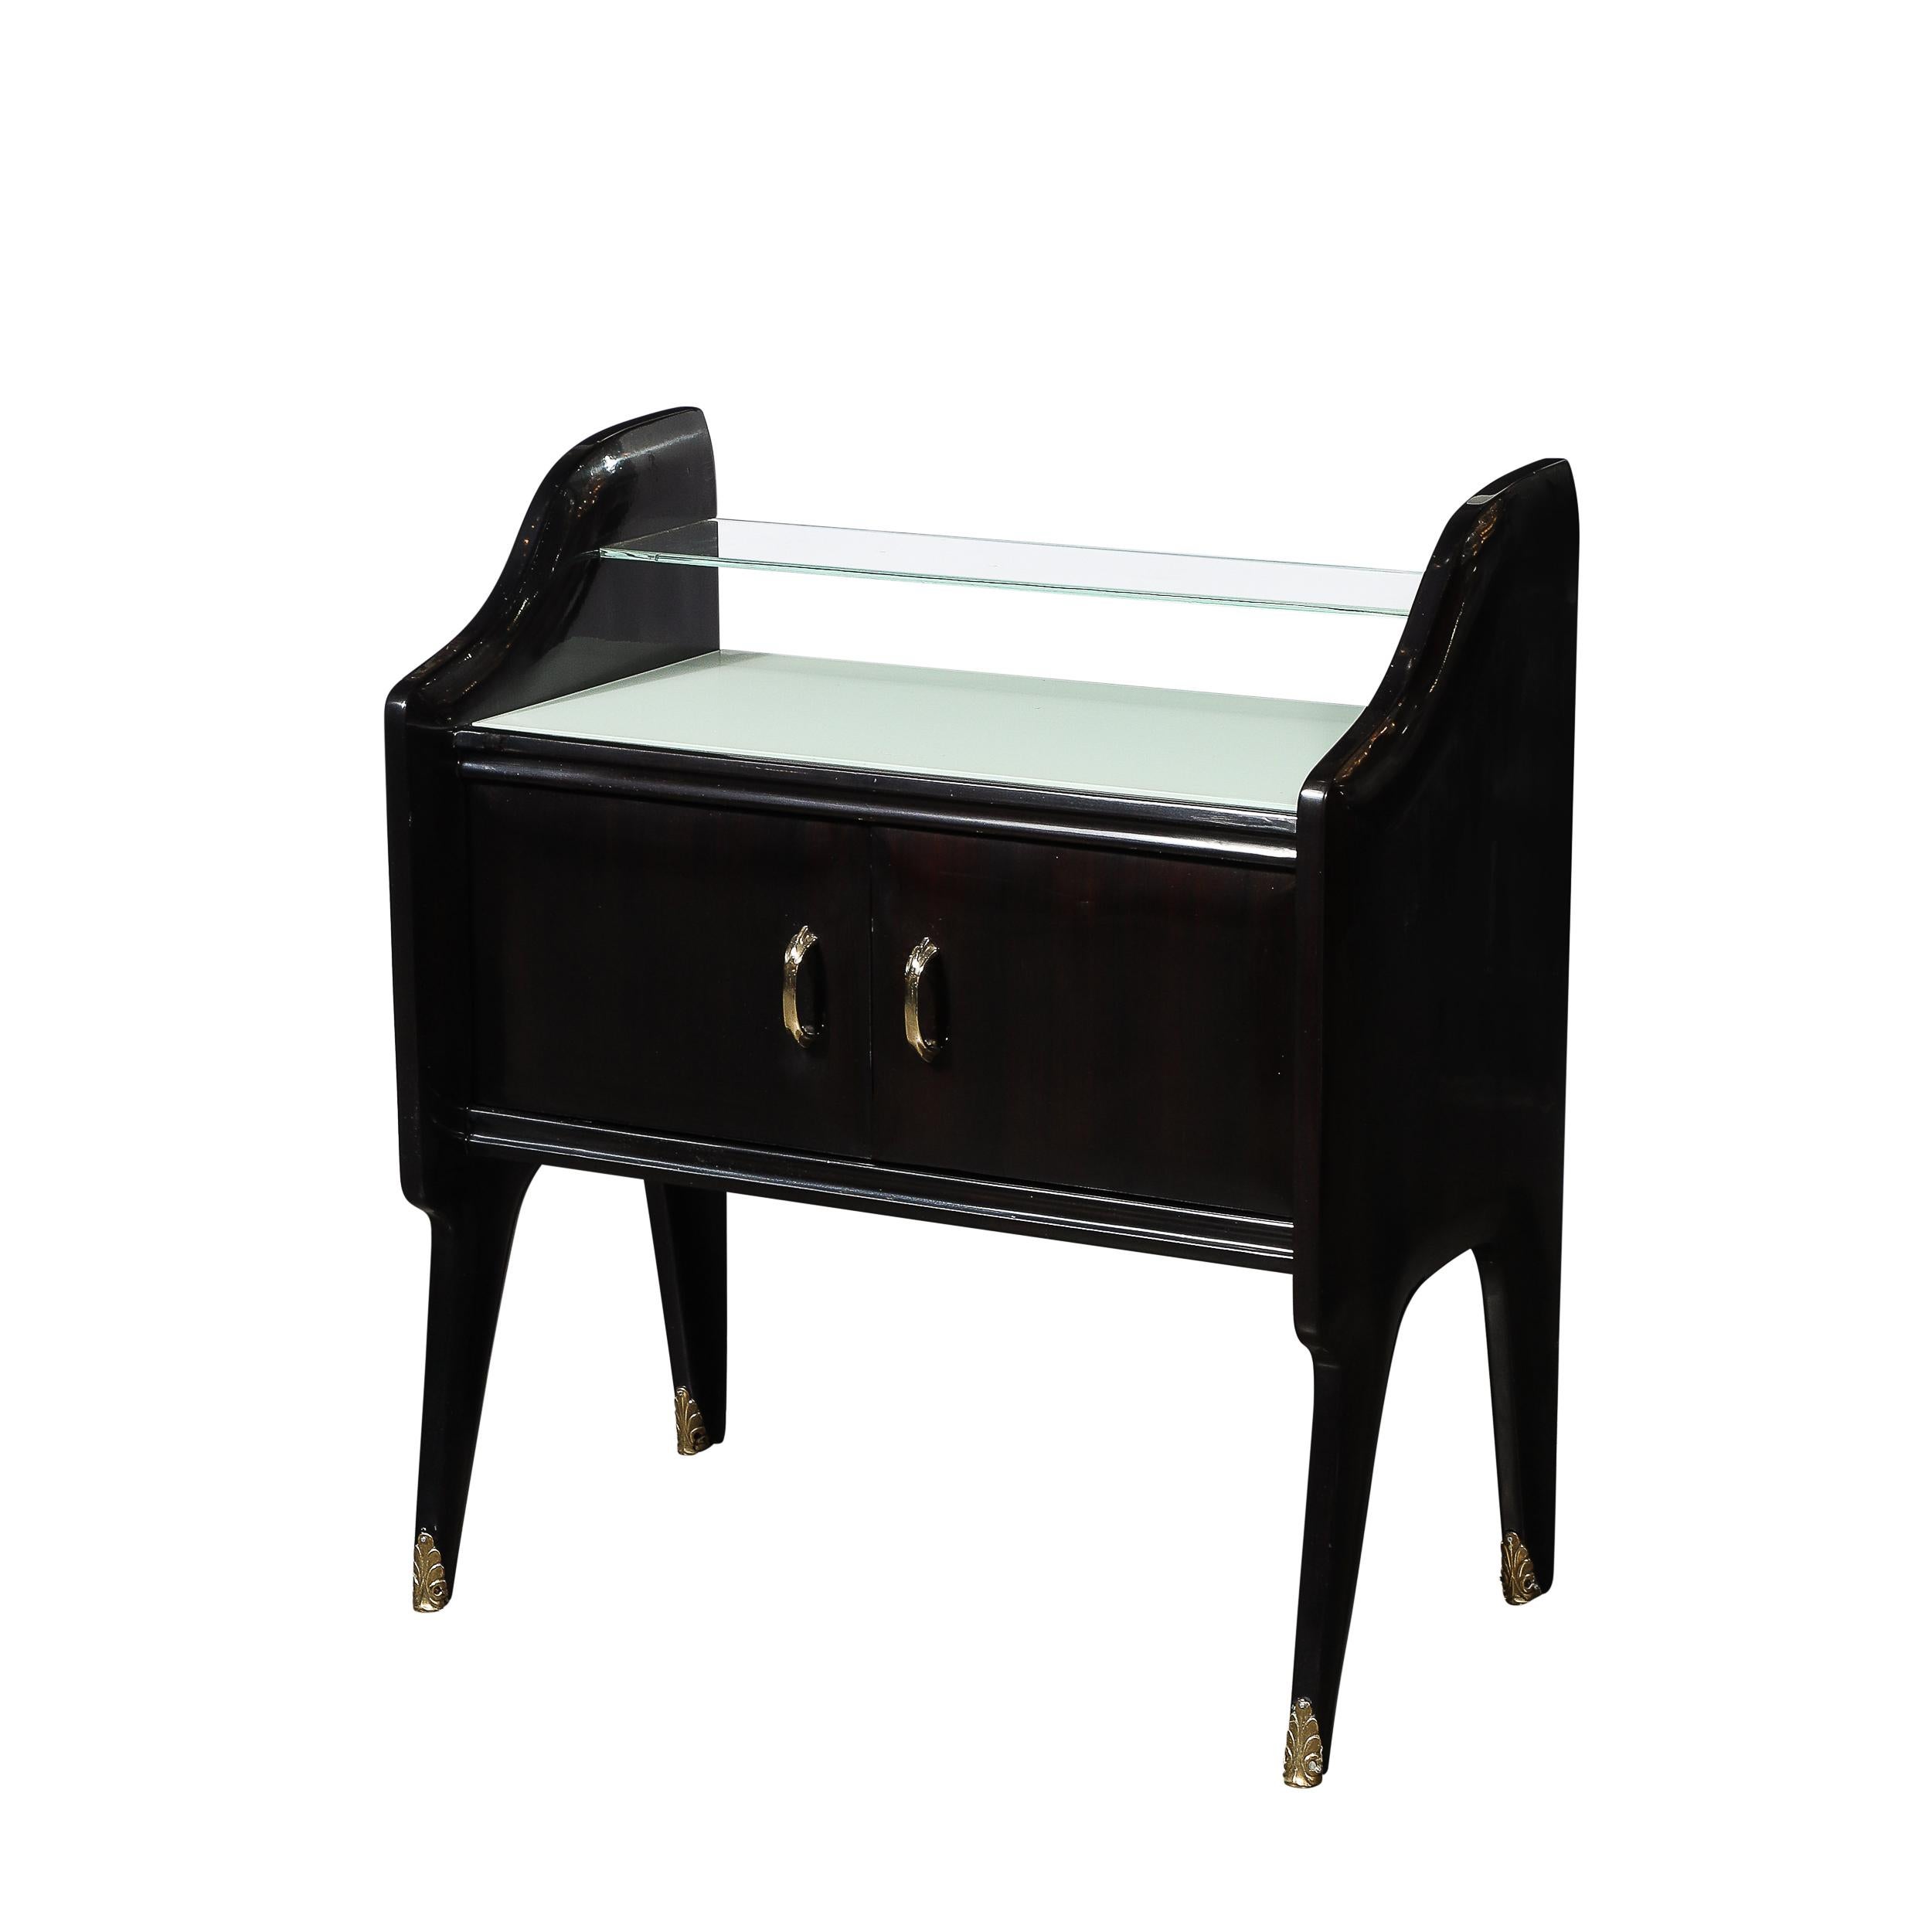 This elegantly reserved Pair of Mid-Century Modernist Sculptural Nightstands in Ebonized Walnut W/Brass Pulls and Sabots are by the esteemed designer Ico Parisi and originate from Italy Circa 1950. Features a two tier top surface containing a narrow